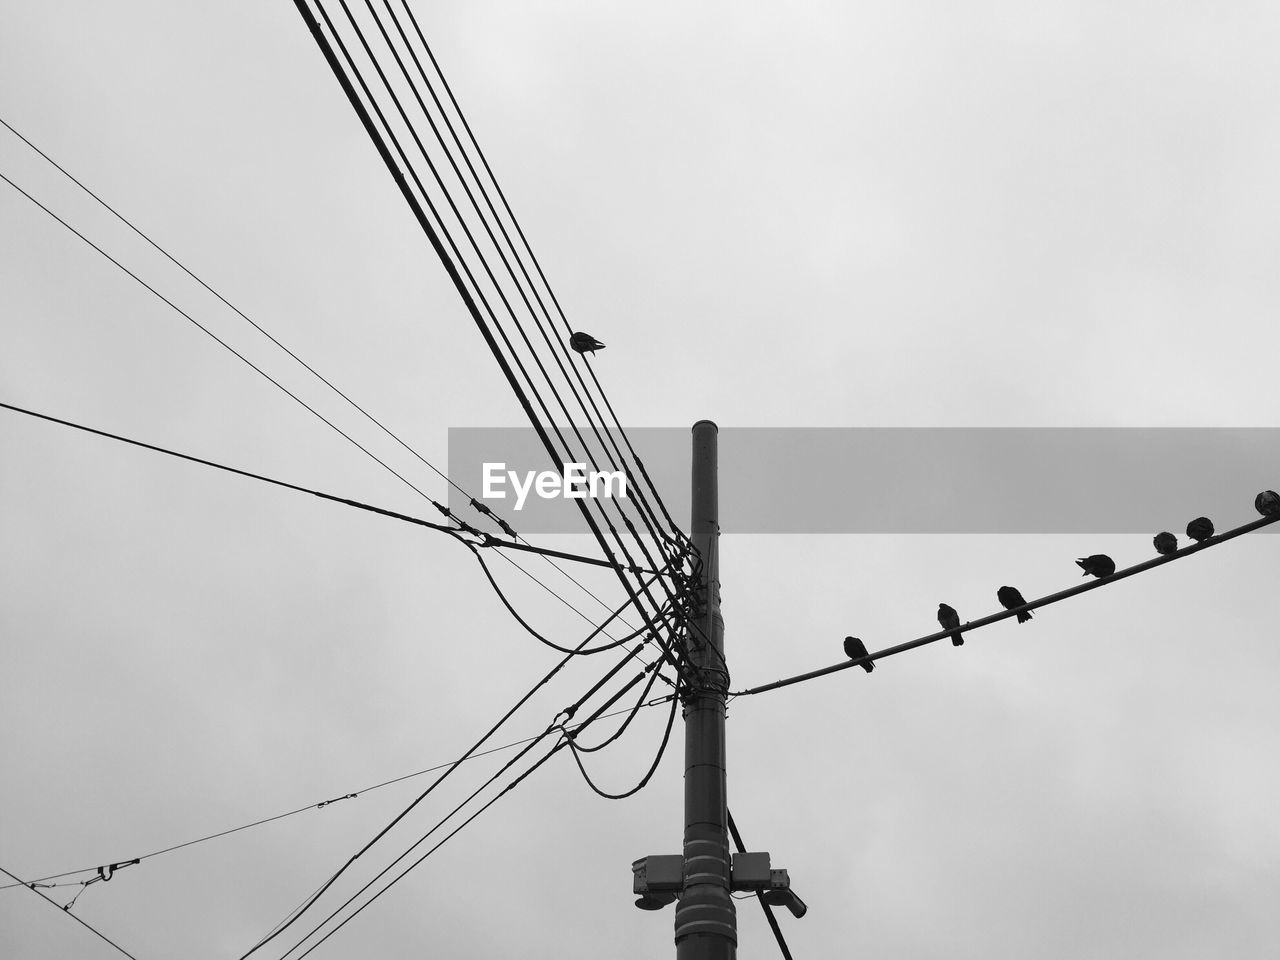 Low angle view of electricity pole and cables against cloudy sky